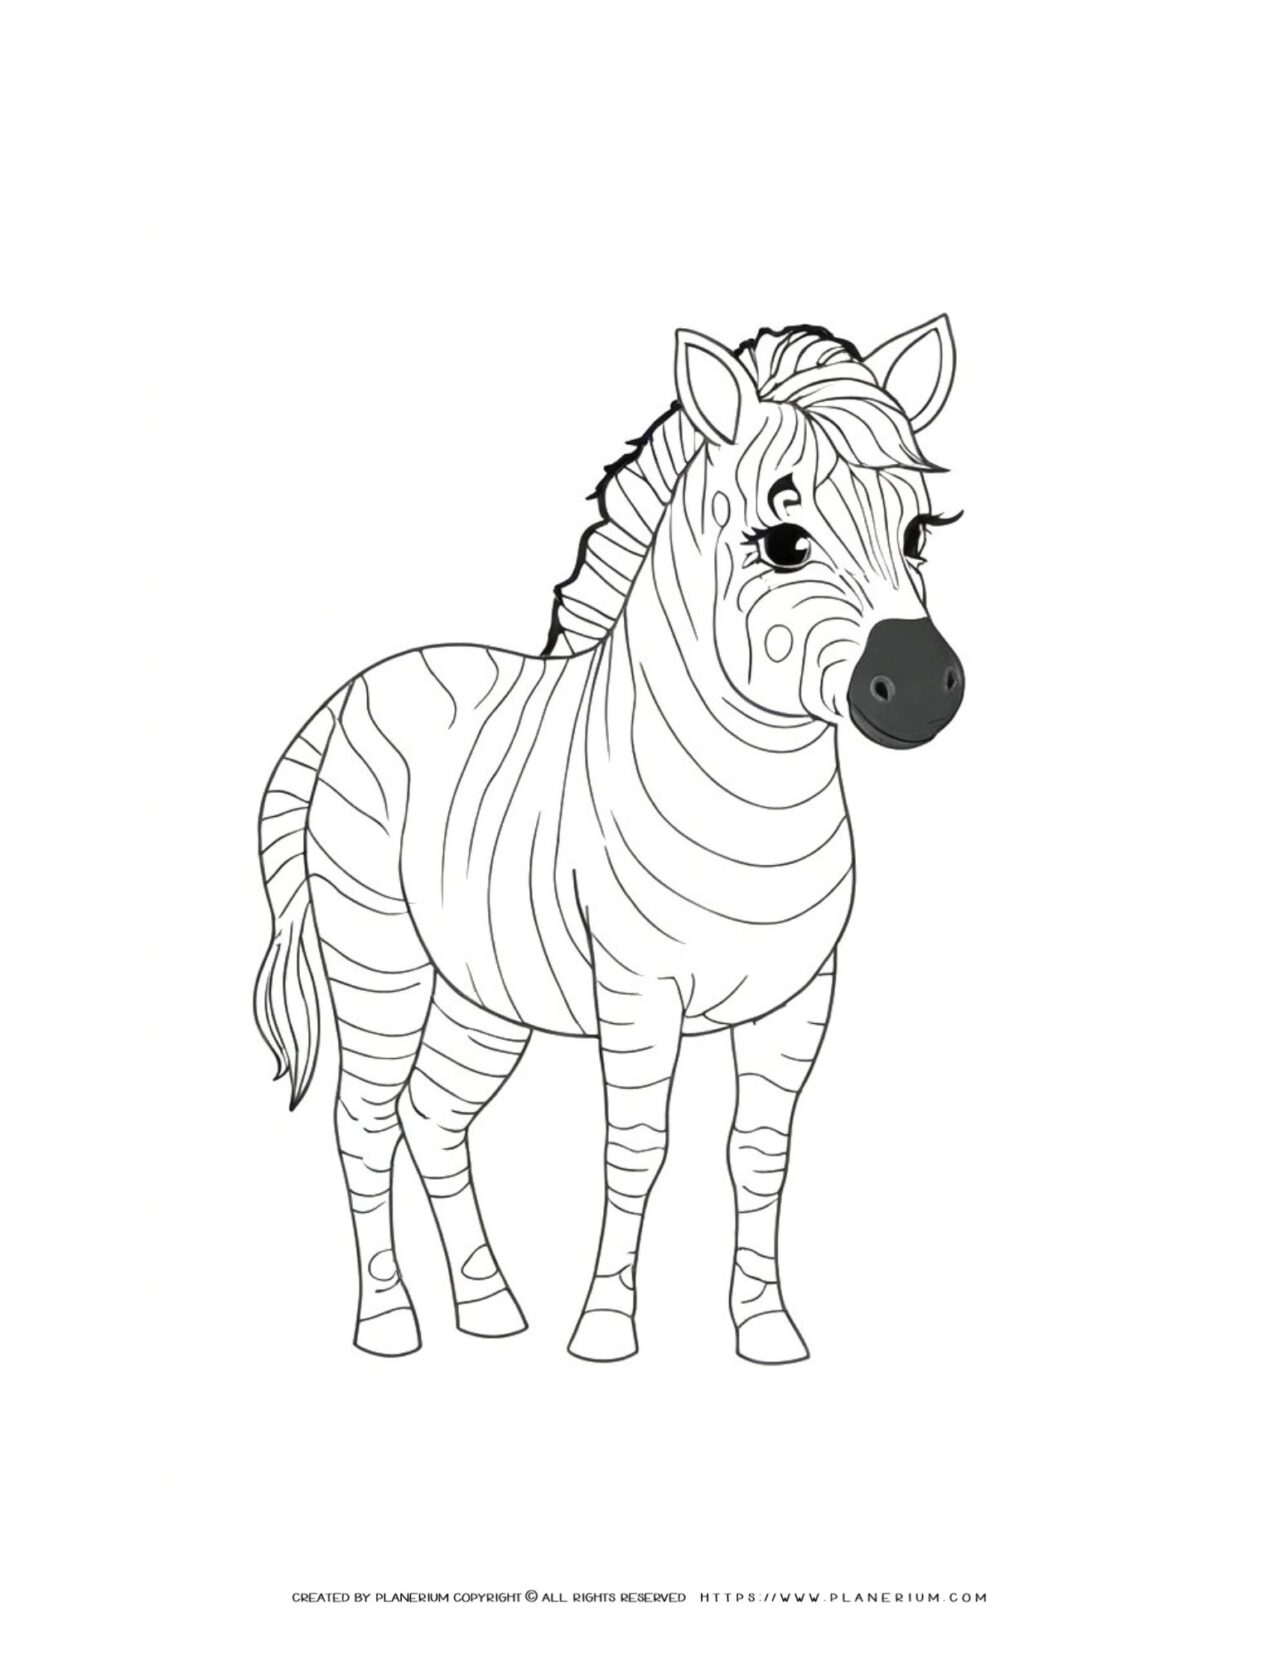 Zebra-Drawing-Coloring-Page-for-Kids